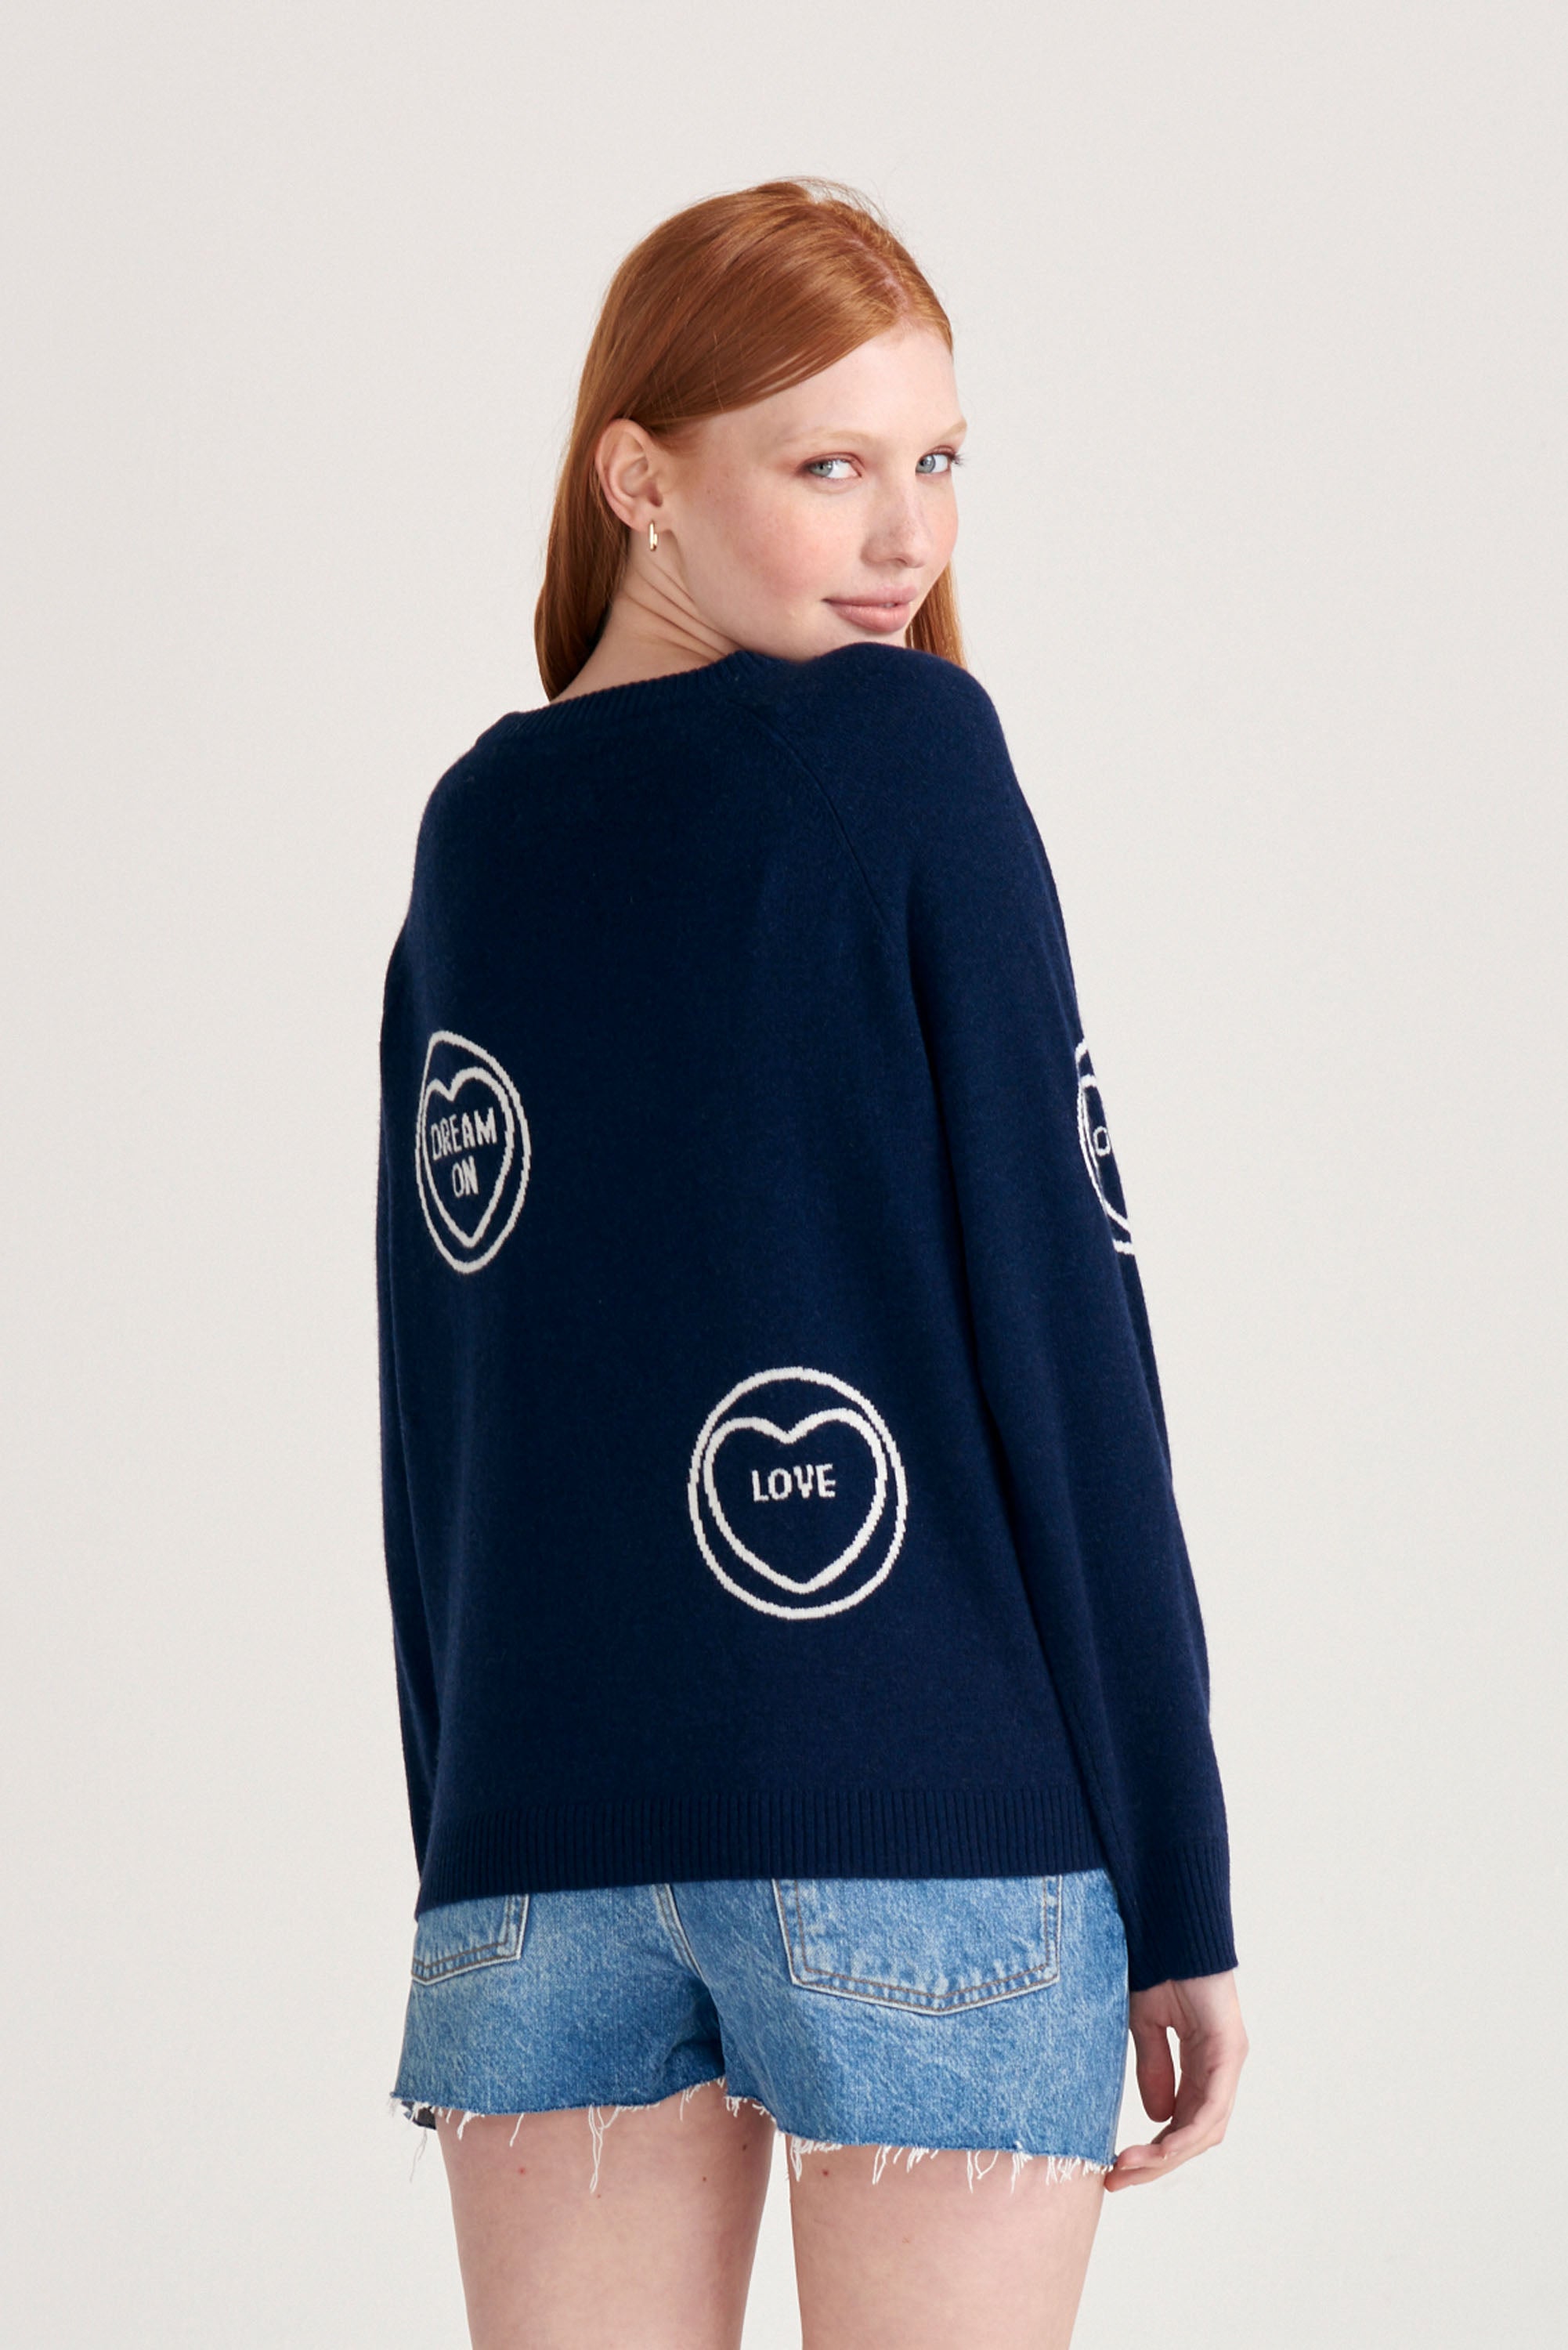 Red haired female model wearing Jumper1234 navy cashmere and wool mix crew neck sweatshirt style jumper with all over cream love hearts intarsia facing away from camera